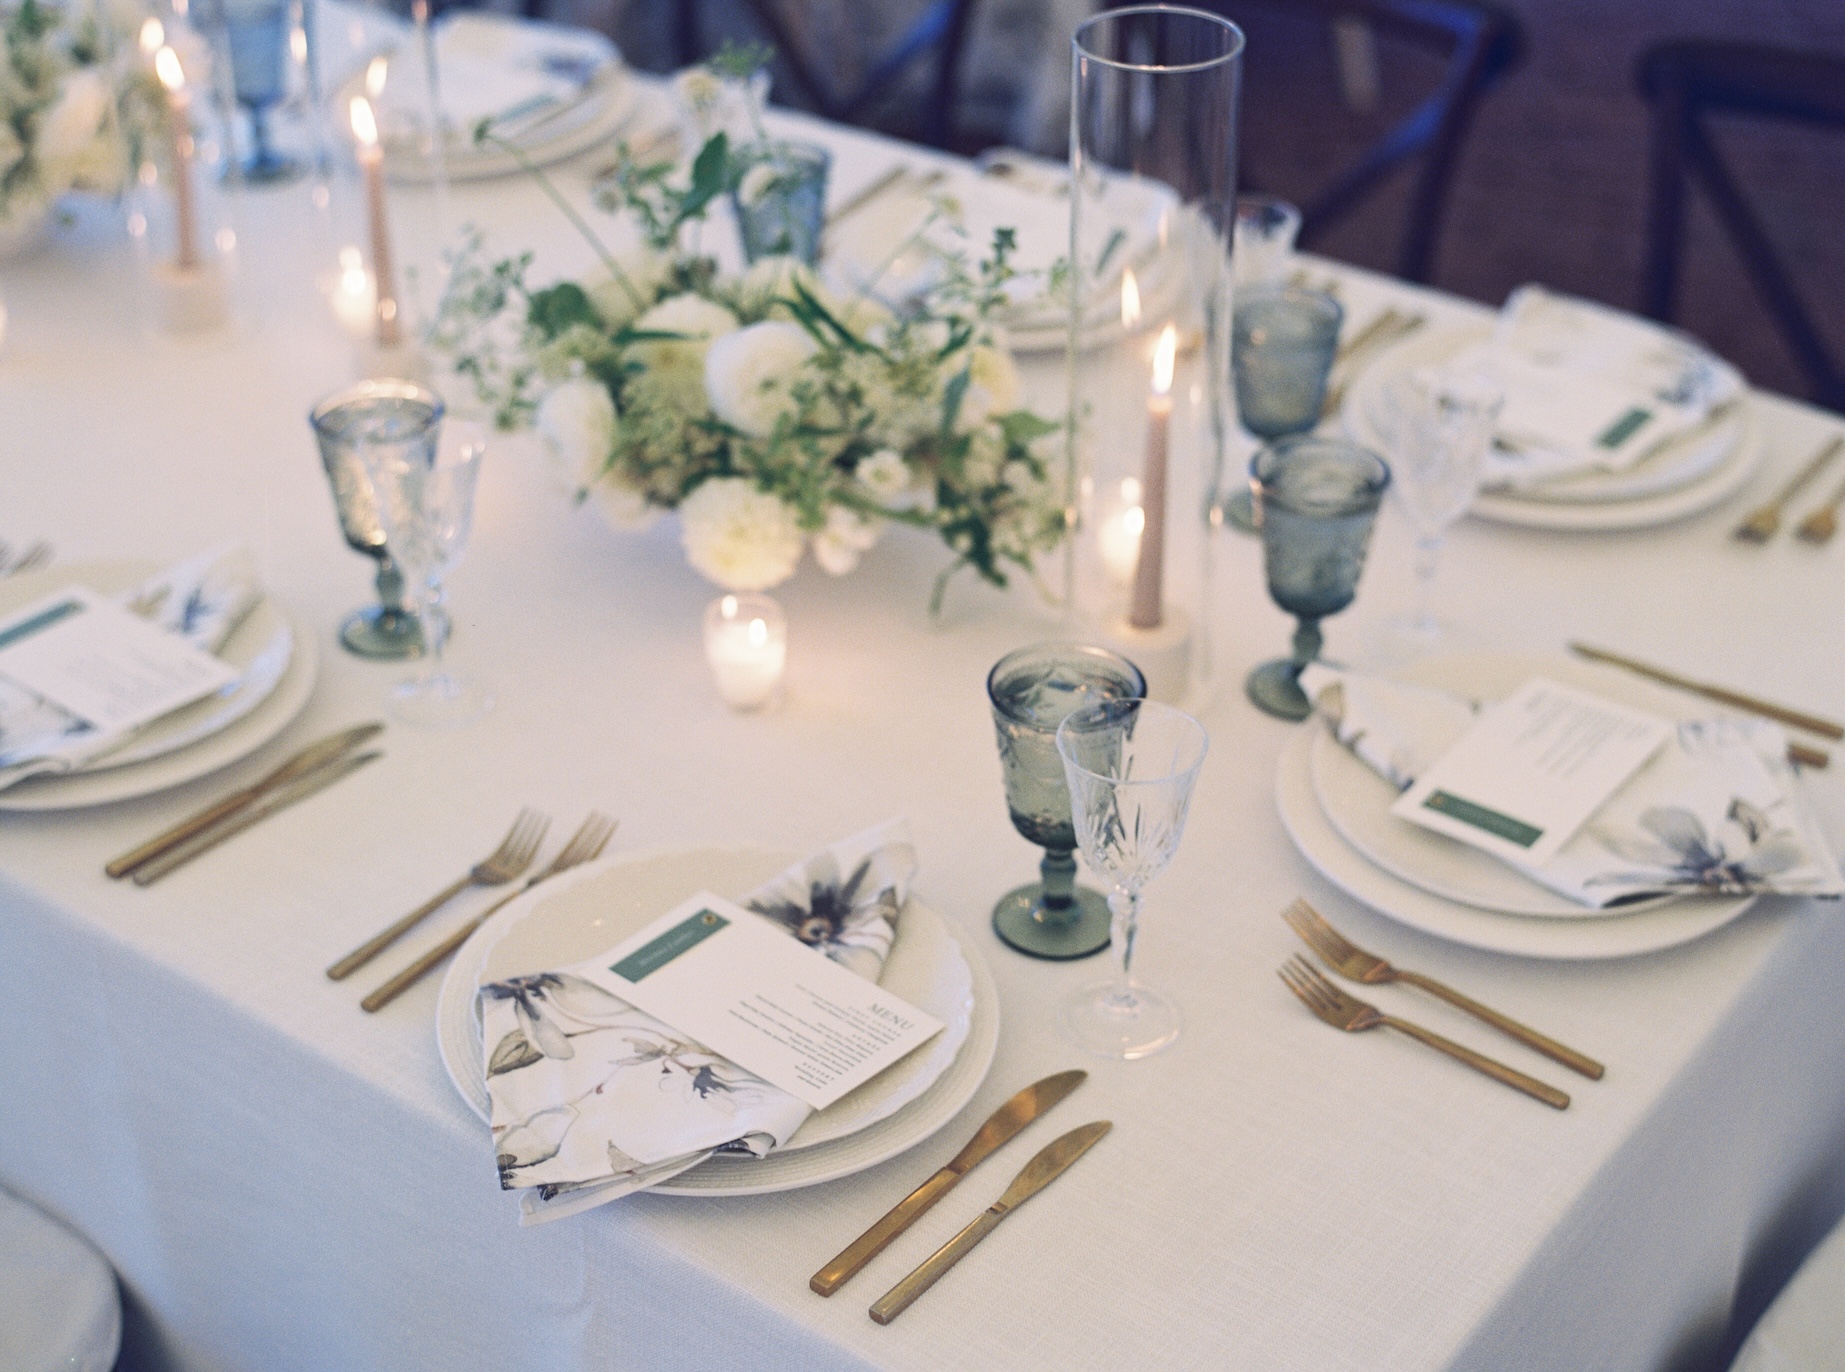 A table set for an elegant dinner party, featuring exquisite event linens.